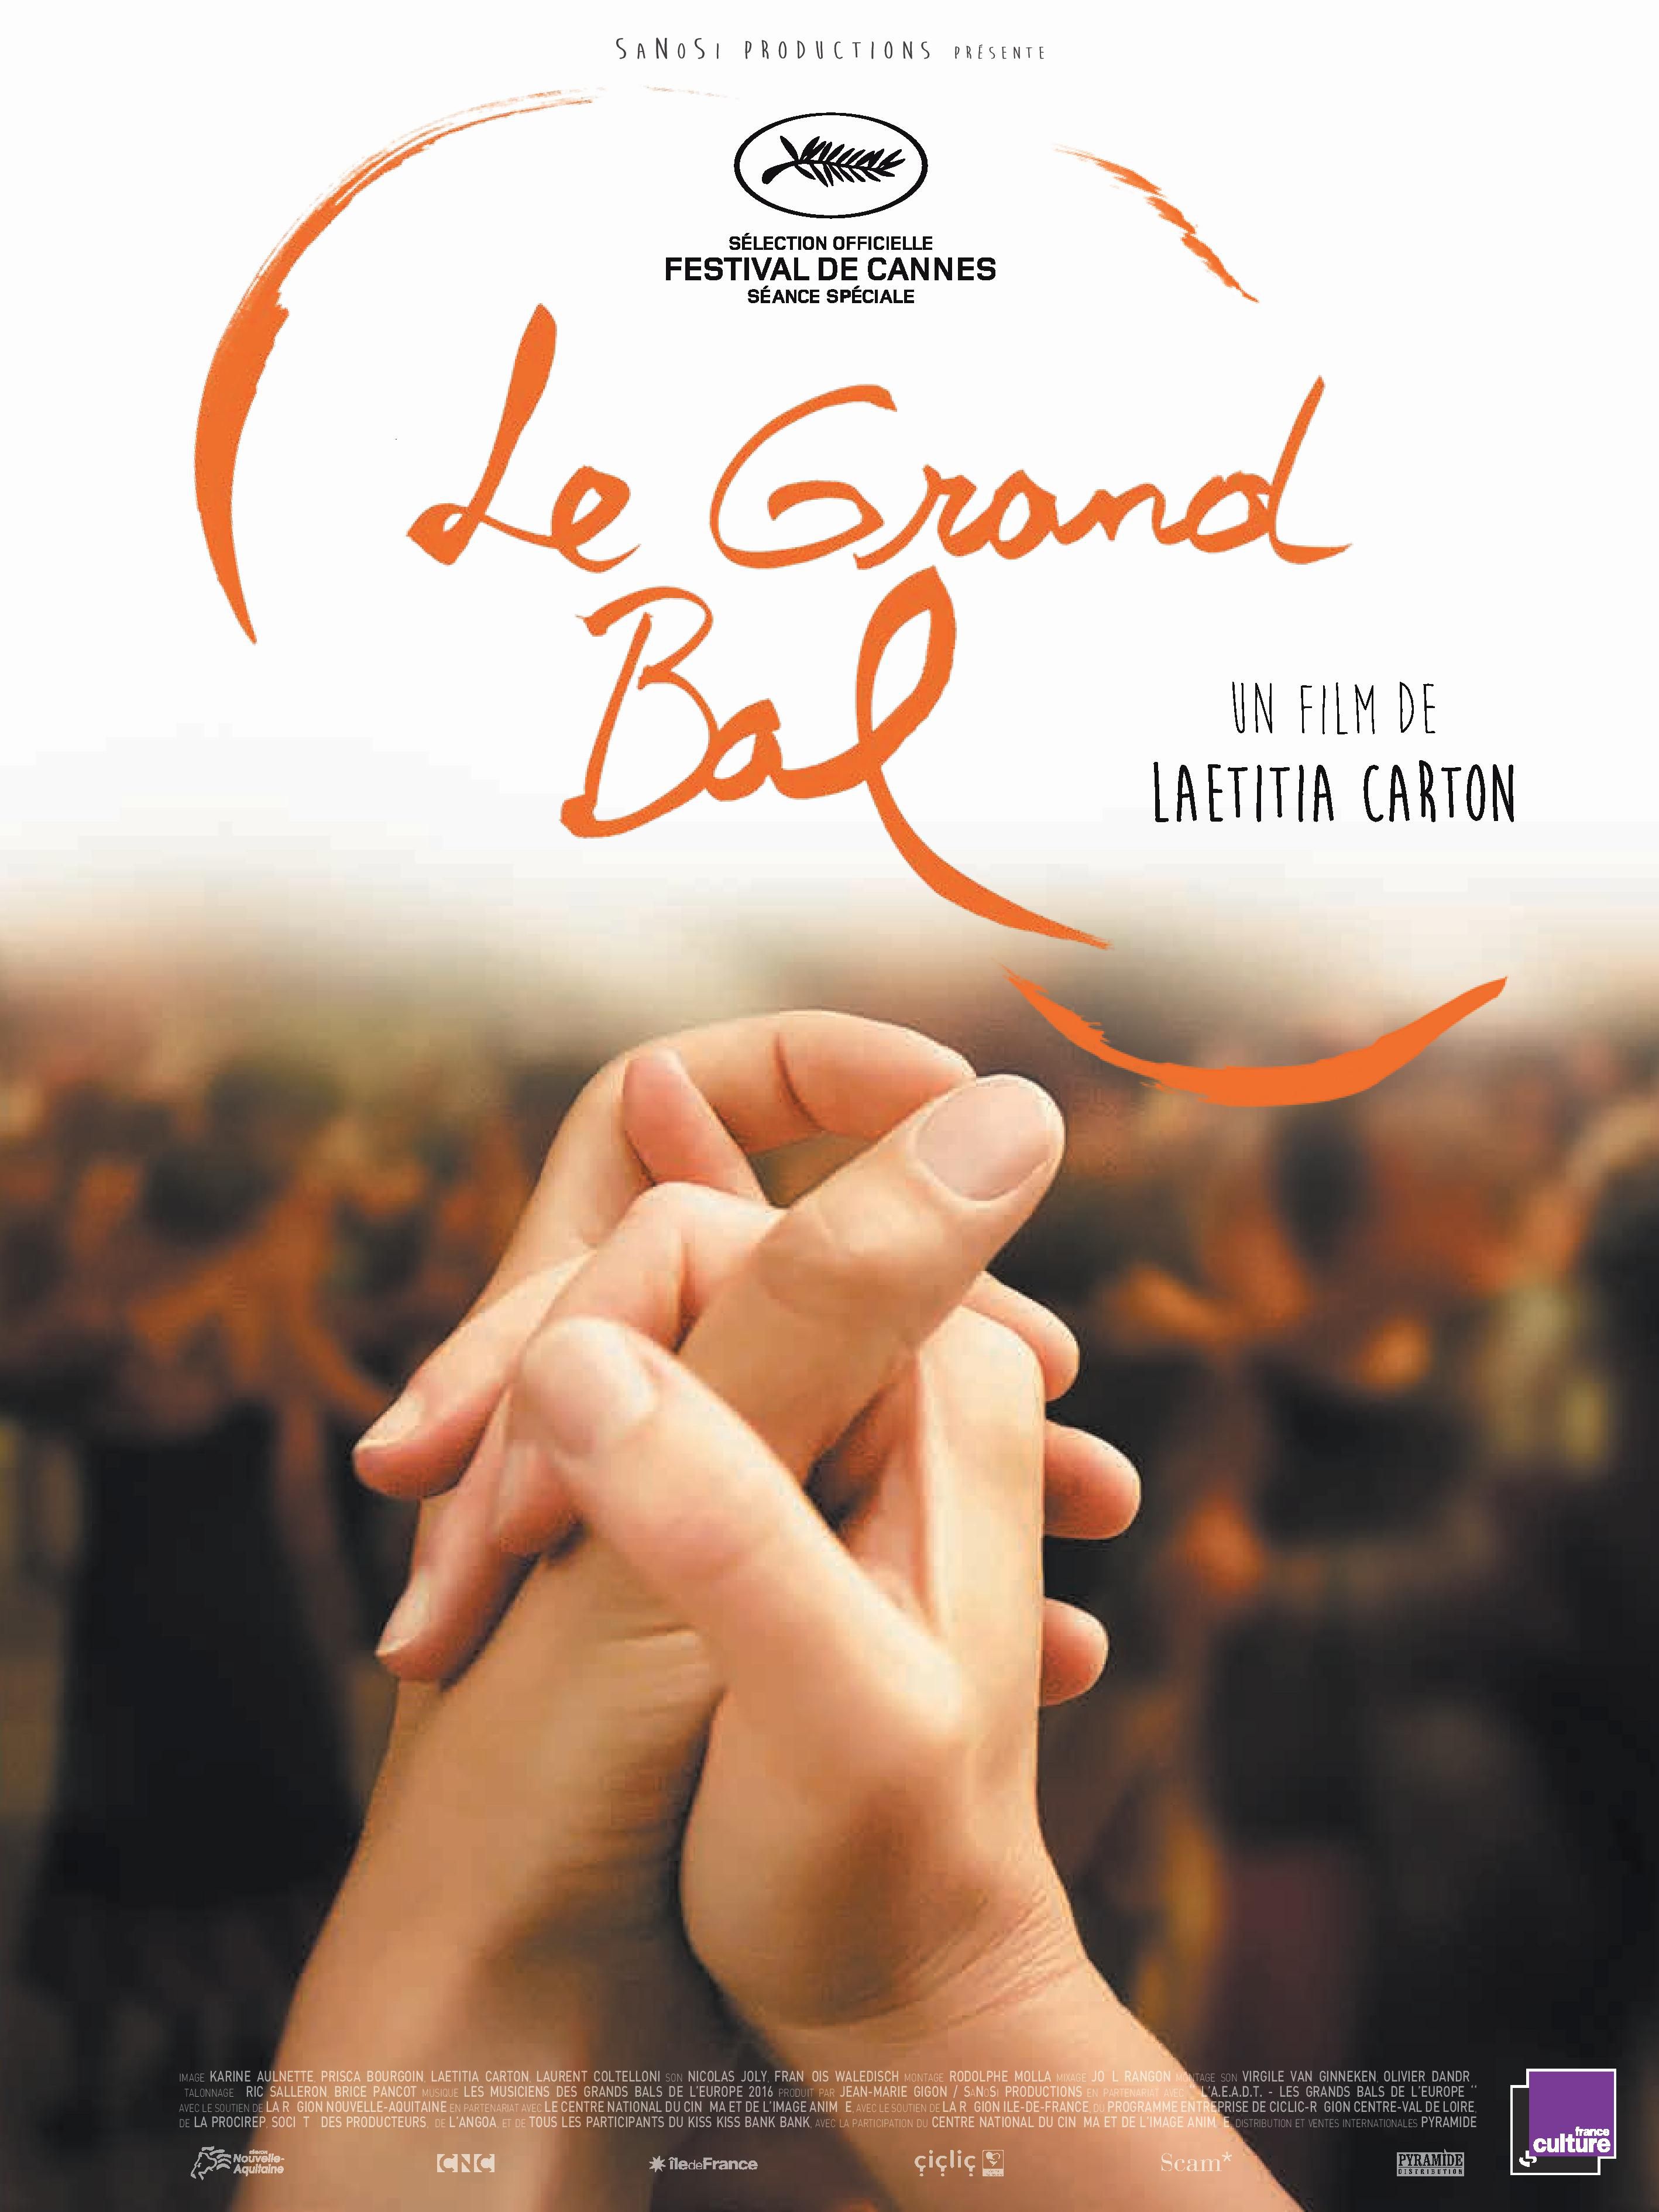 Le Grand Bal - Documentaire (2018) streaming VF gratuit complet